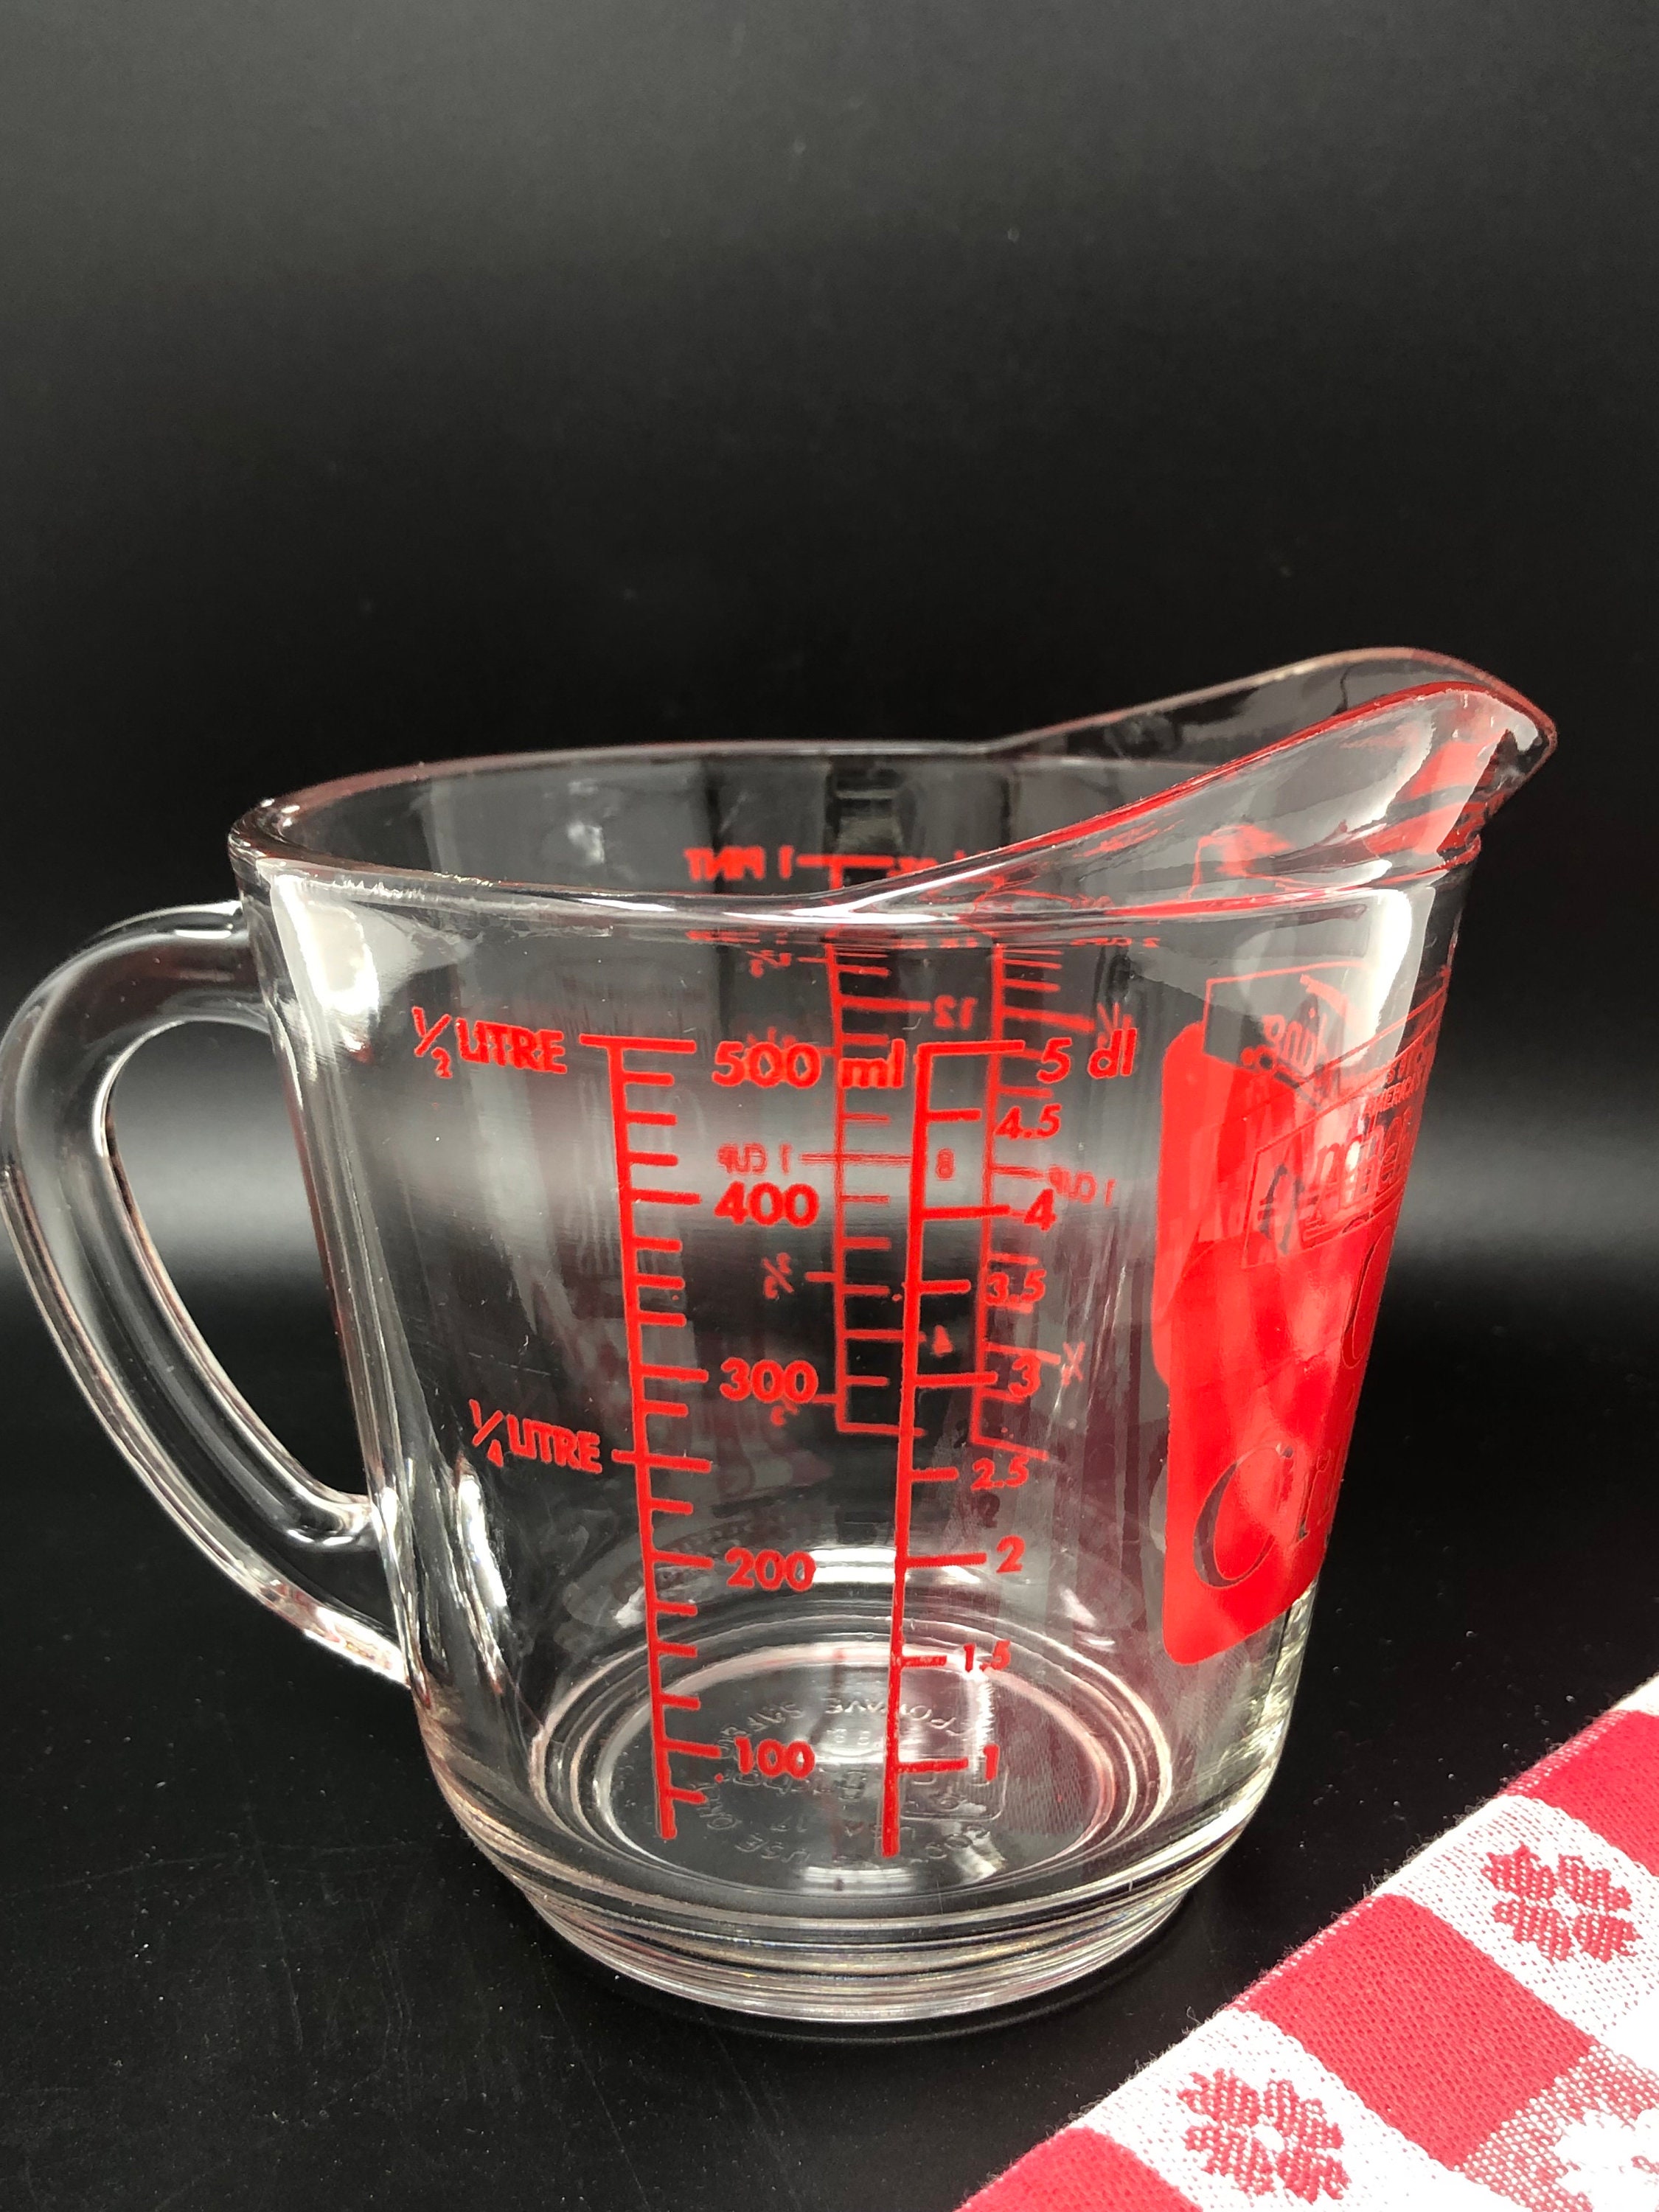 Vintage Anchor Hocking 1970 Glass 8 Cup Measuring Cup With Handle